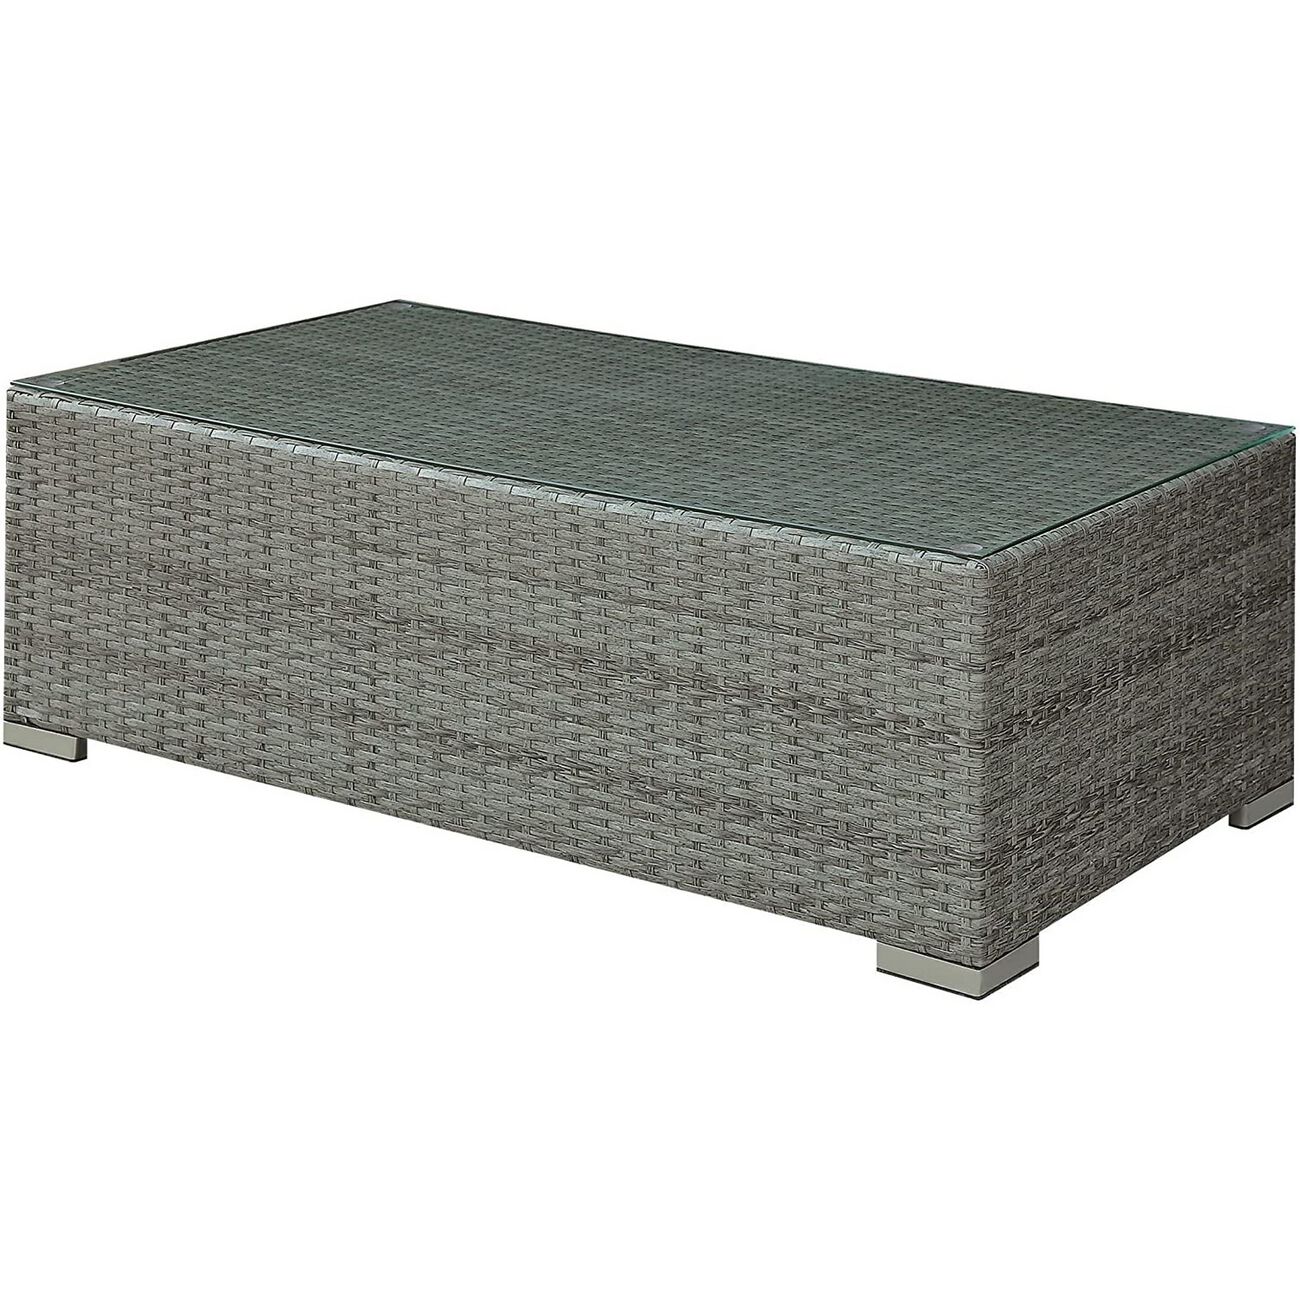 Woven Wicker Rectangular Coffee Table with Tempered Glass Tabletop, Gray